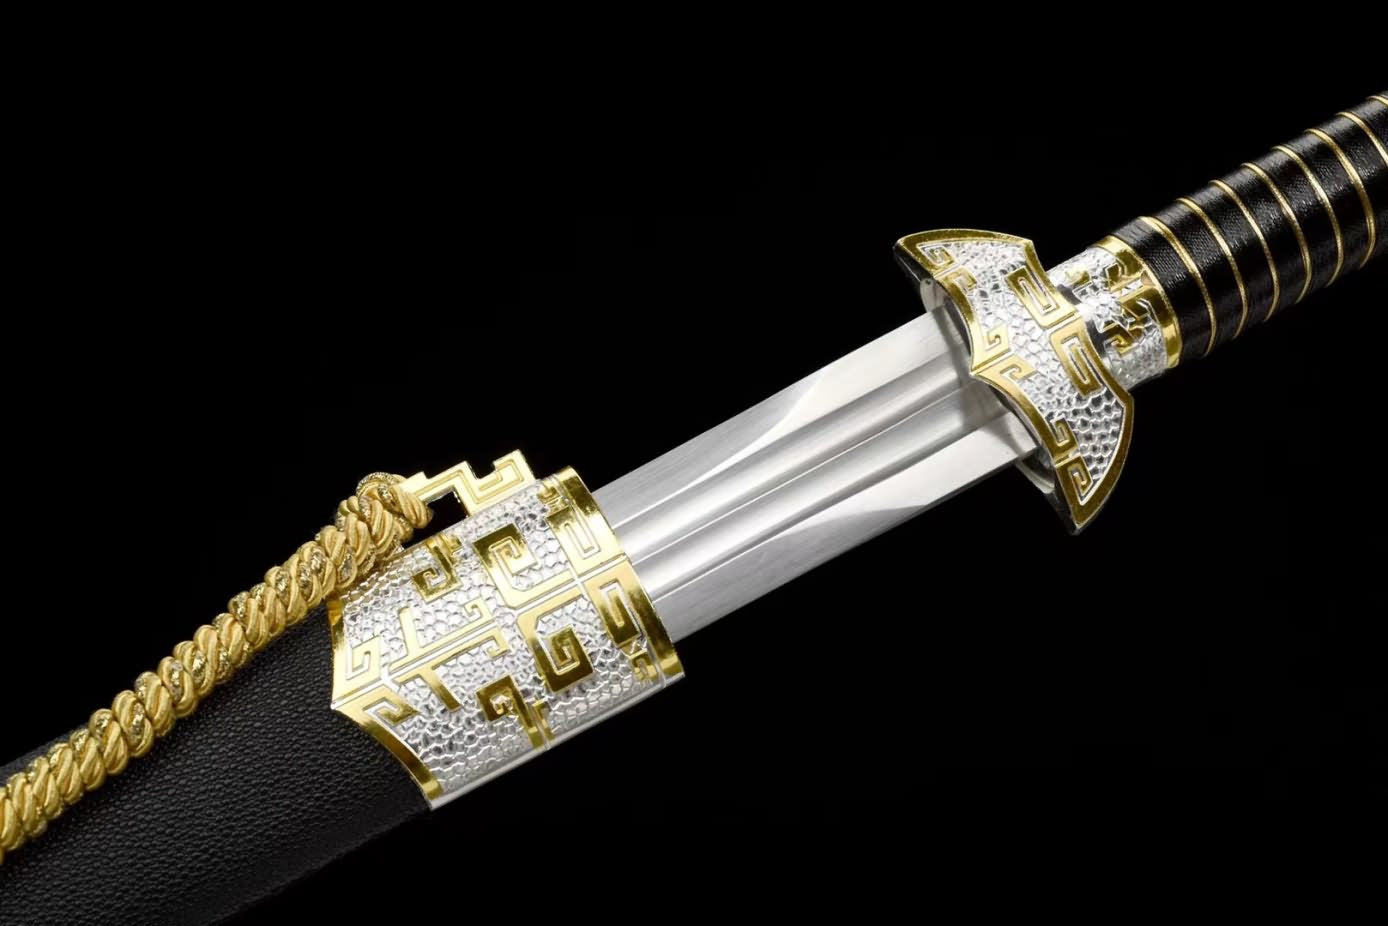 Chinese sword,Black Gold jian Forged high Carbon Steel Blade,Alloy Fittings,PU Scabbard,LOONGSWORD